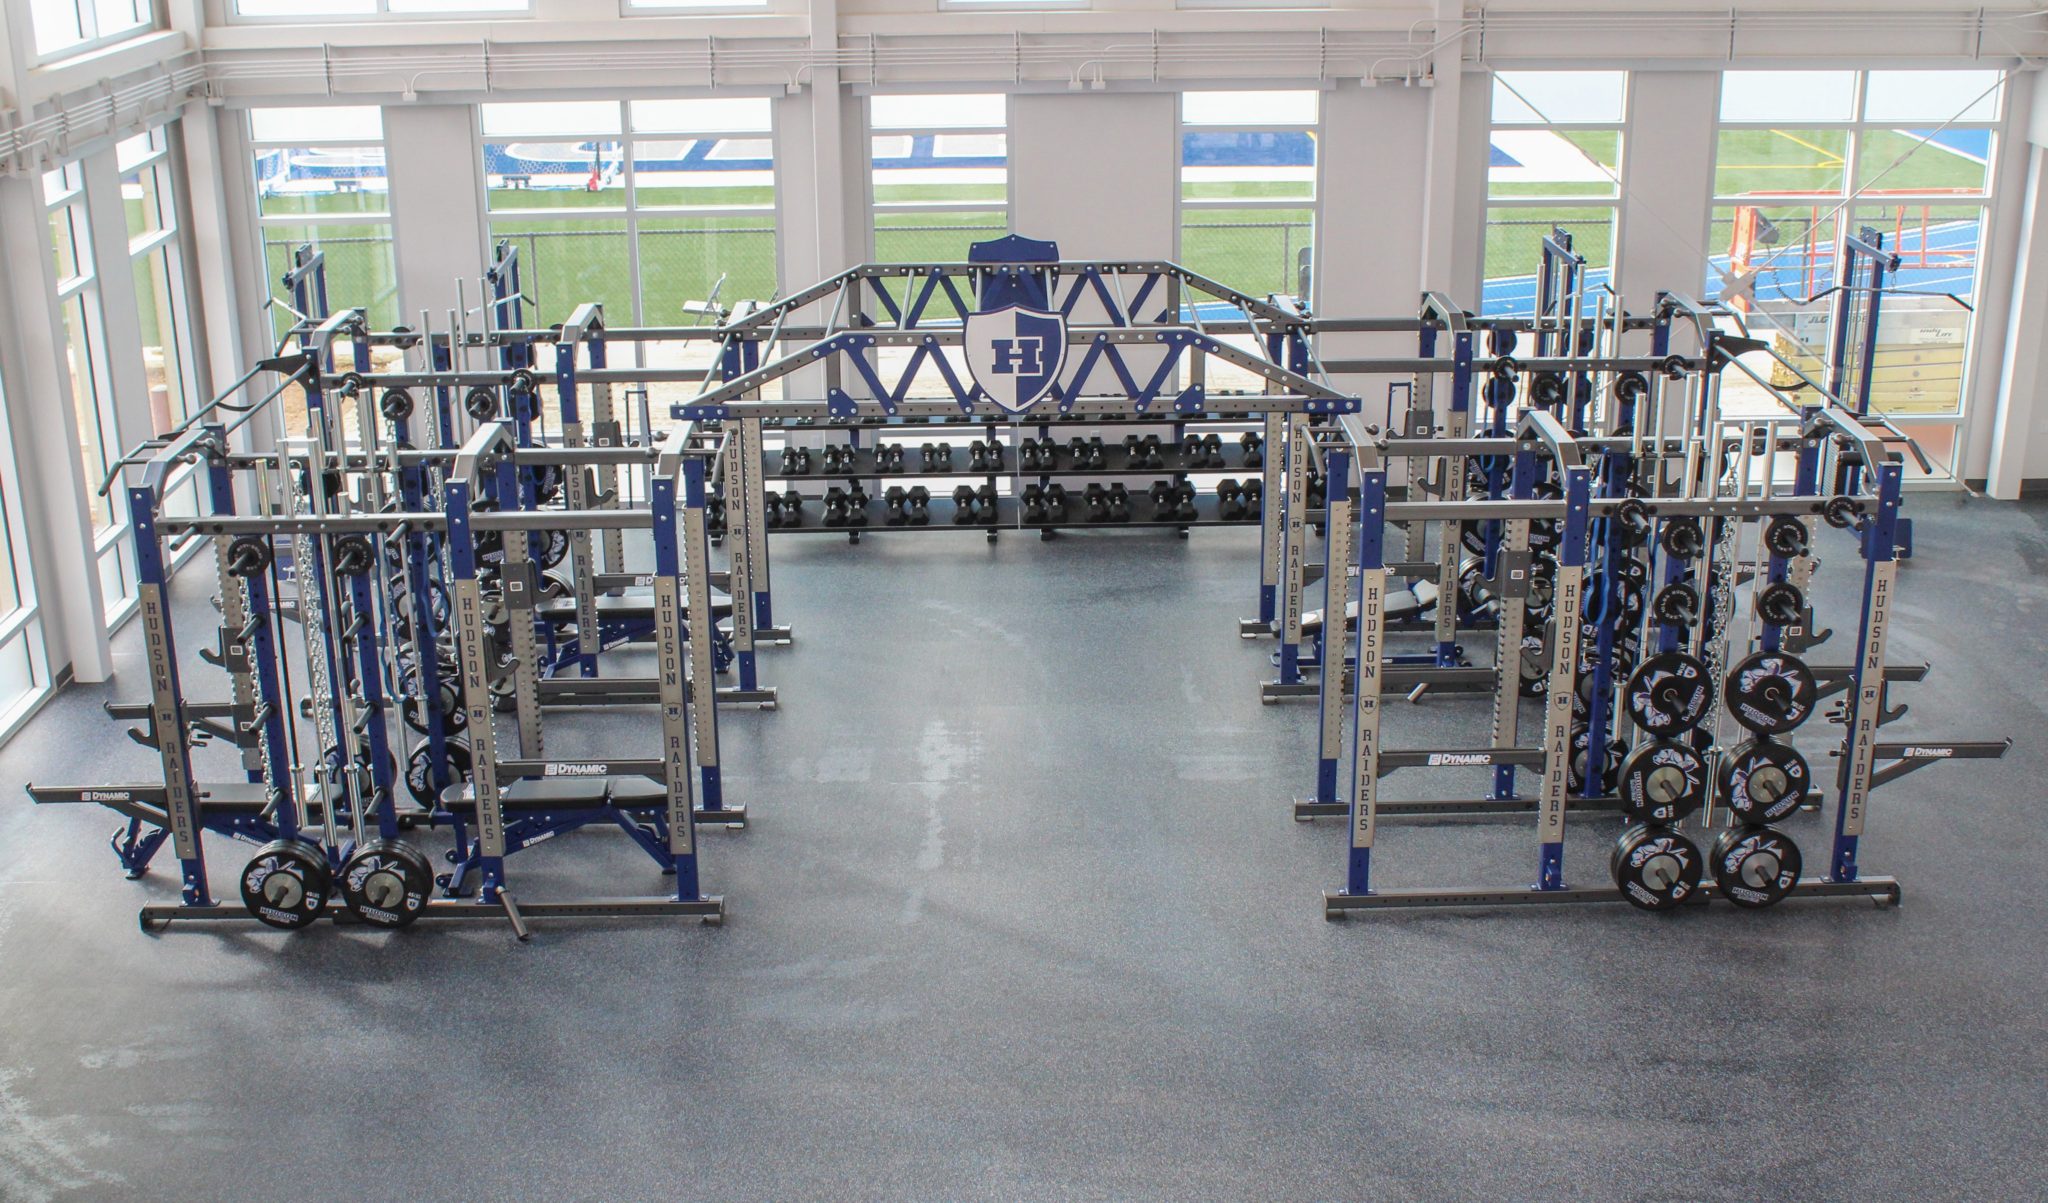 View of the HS lower fitness center weightlifting racks.